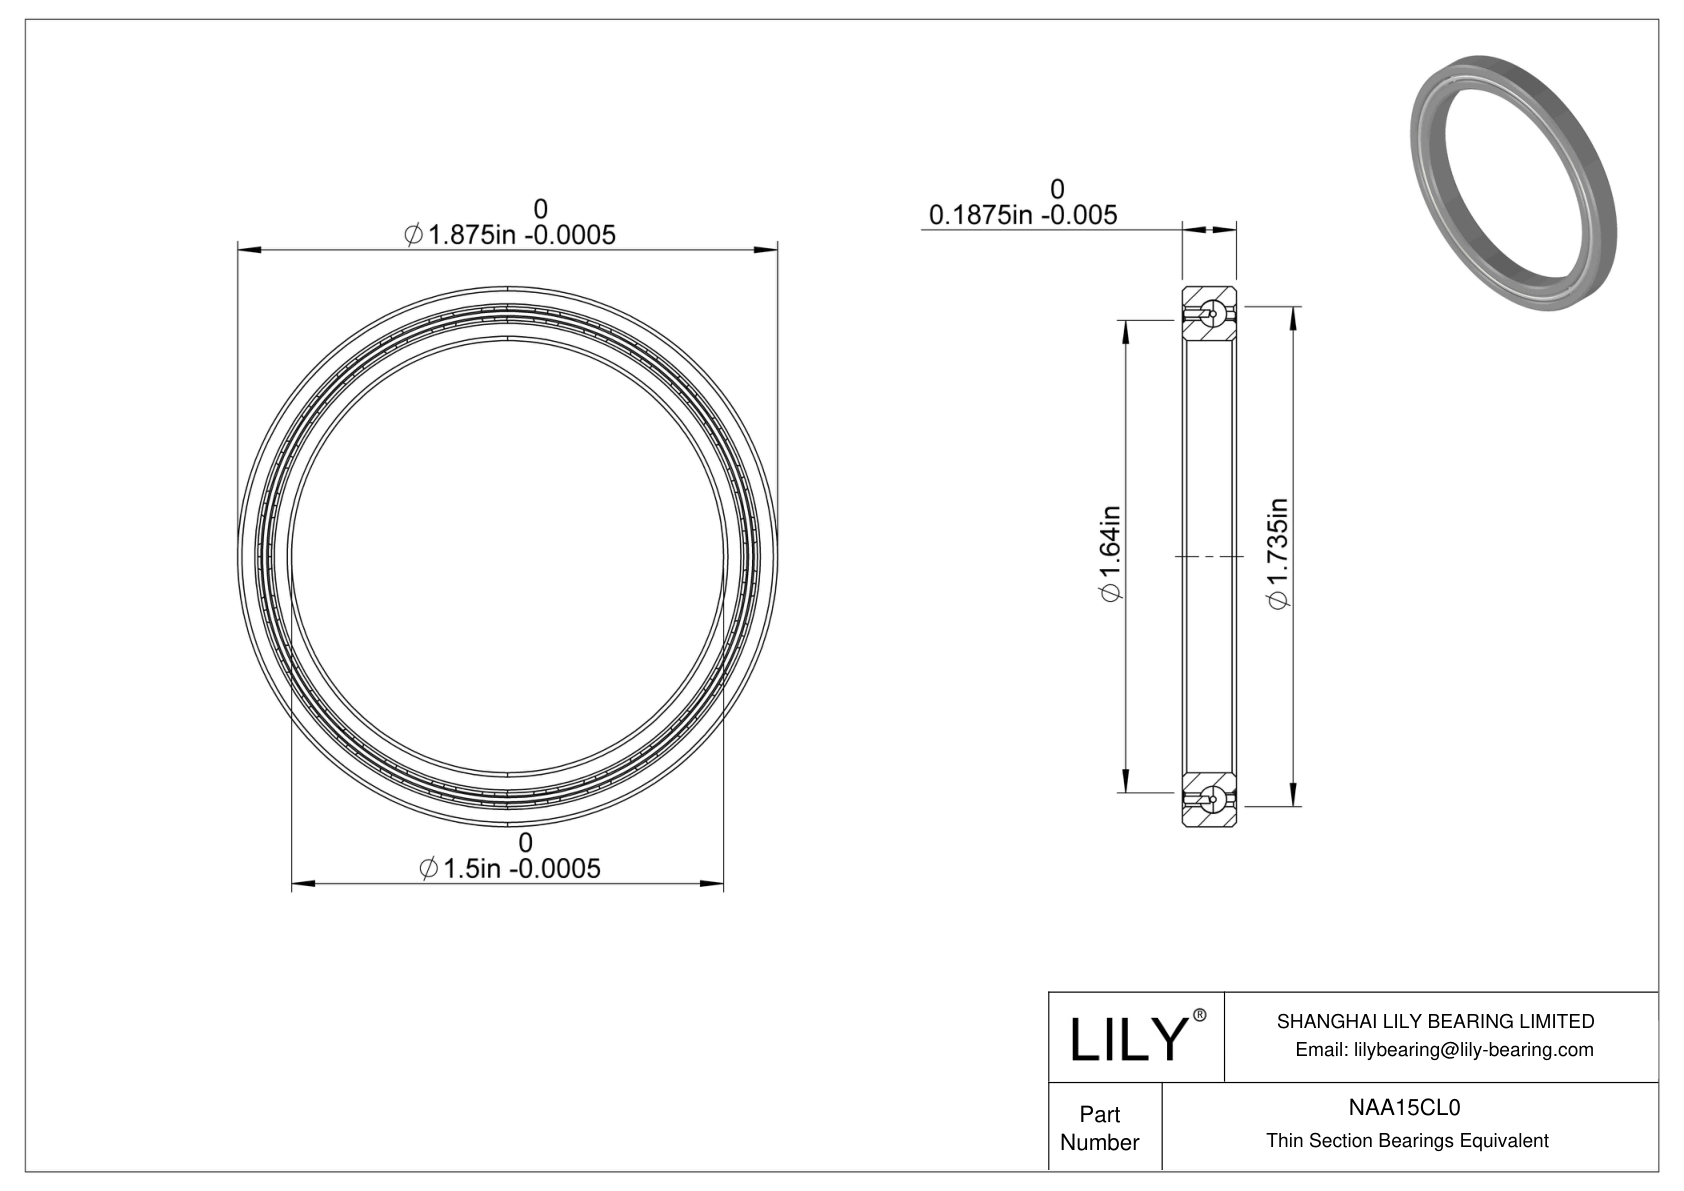 NAA15CL0 Constant Section (CS) Bearings cad drawing